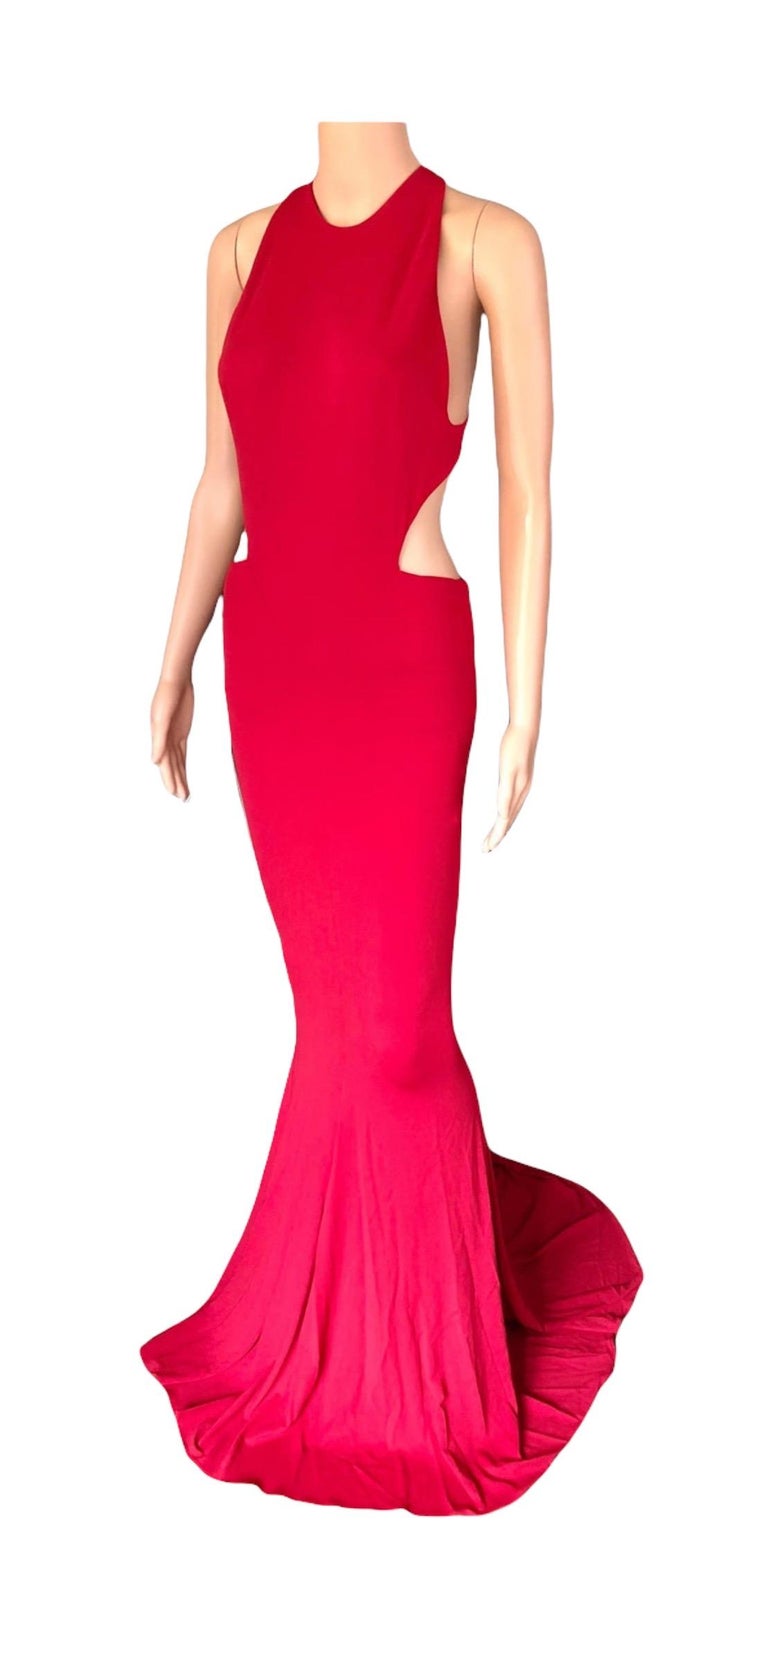 Alexandre Vauthier Cutout Backless Red Evening Dress Gown  For Sale 6